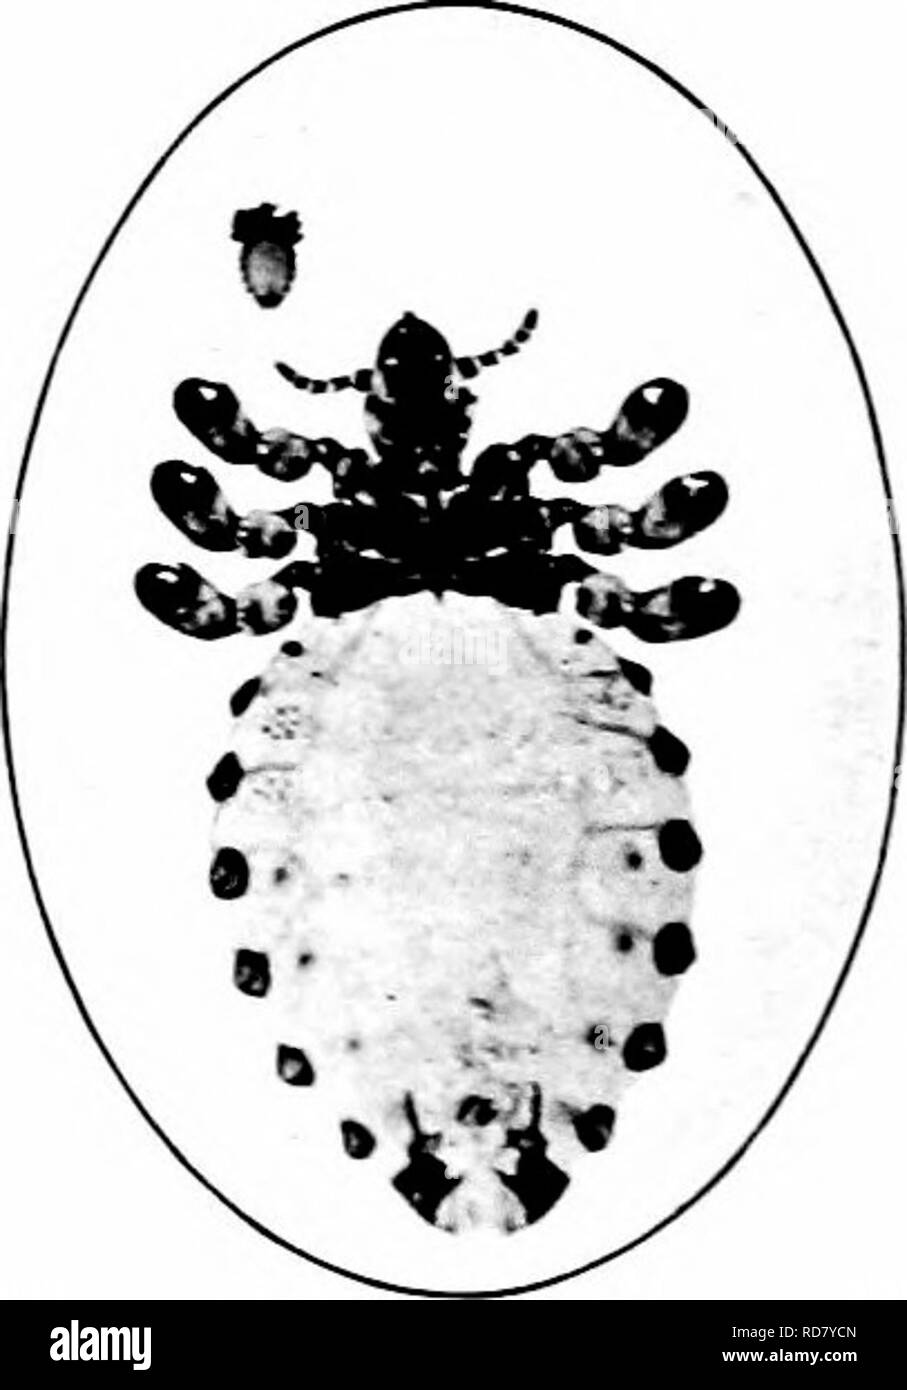 . Injurious insects : how to recognize and control them . Insect pests; Insect pests. Fig. 599. — The Screw-worm Fly. En- larged and natural size. Original. of carbohc acid, 1 part, water, 30 parts, is excellent, followed by a dressing of pine tar. Sucking Lice on Domestic Animals The larger animals, including cattle, horses, swine, and others, are often infested with sucking hce, which frequently cause great irritation. Several species are common. The Short-nosed Ox Louse {Hwmato- pinus eury.sternus Xitzsch) is slaty in color, one eighth to one fifth of an inch long and about half as broad. U Stock Photo